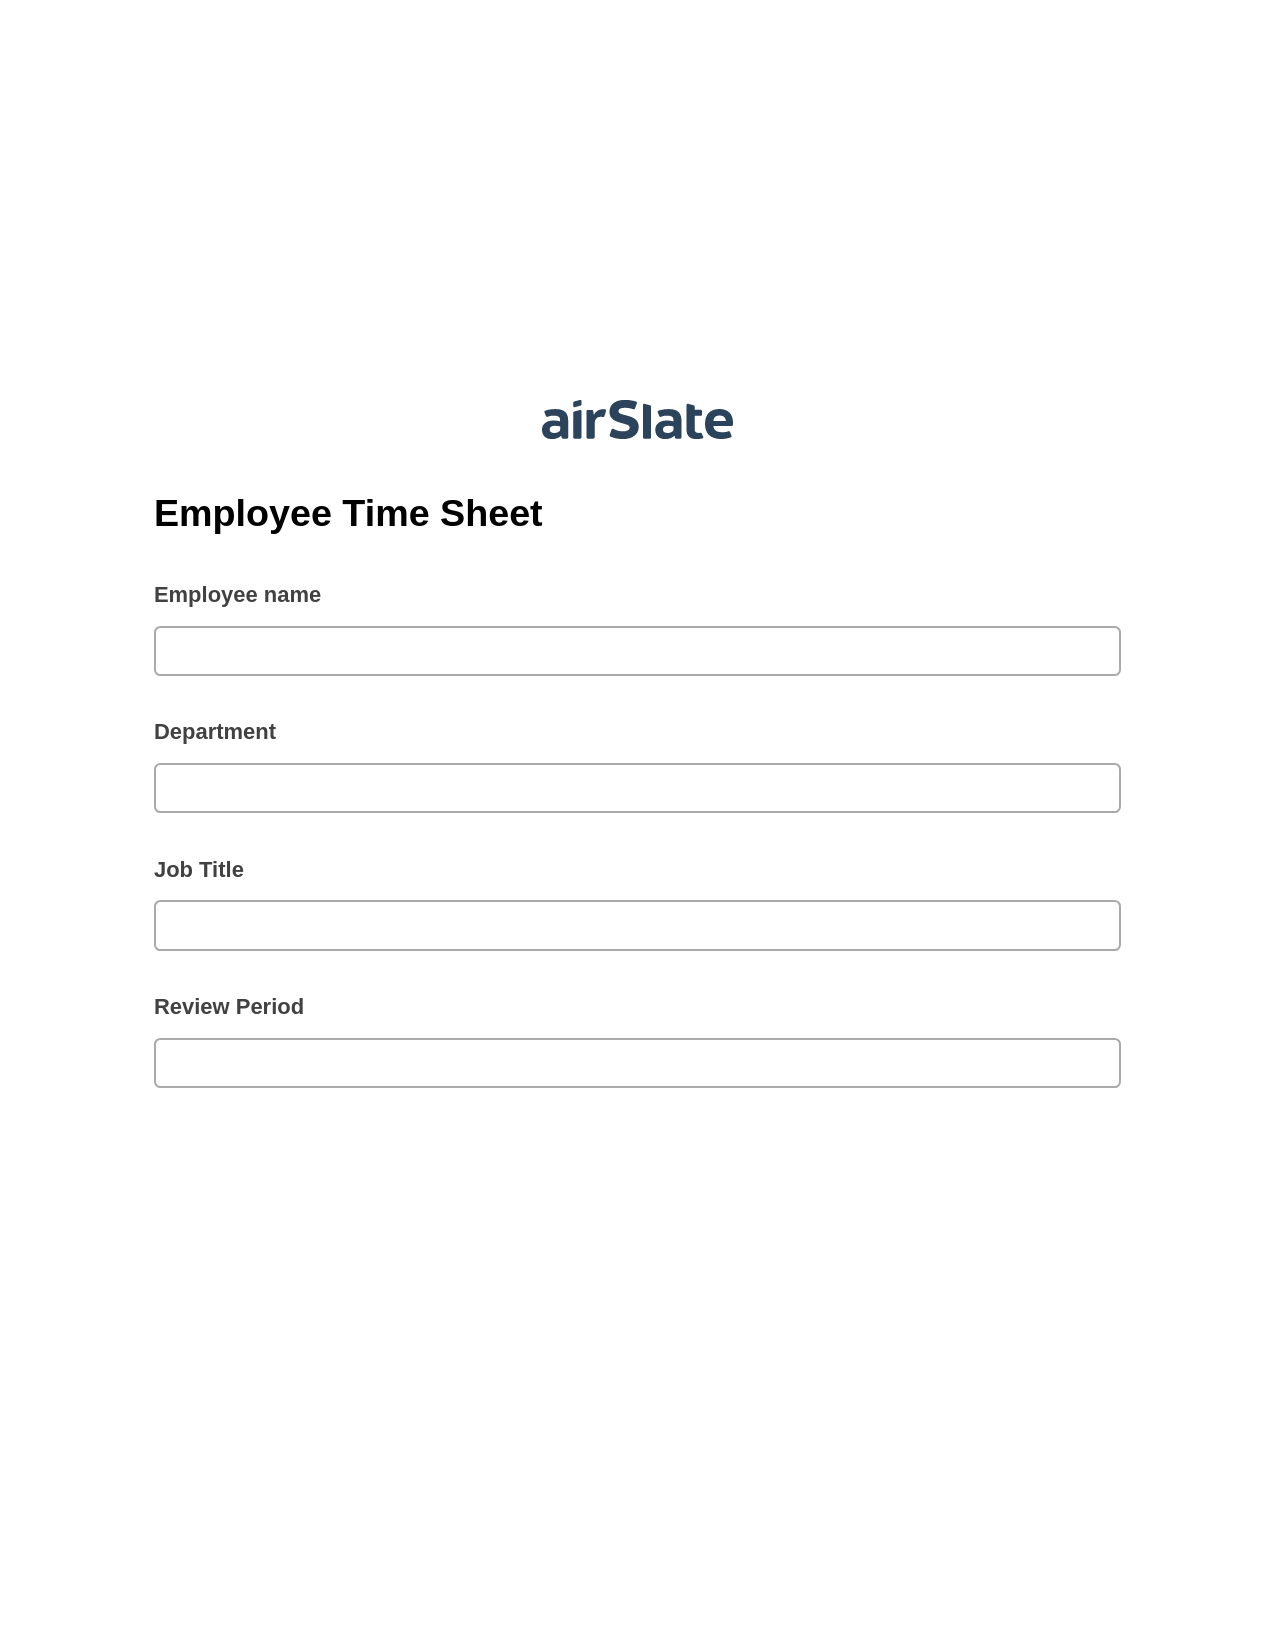 Employee Time Sheet Pre-fill Dropdowns from Airtable, Email Notification Bot, Export to Excel 365 Bot